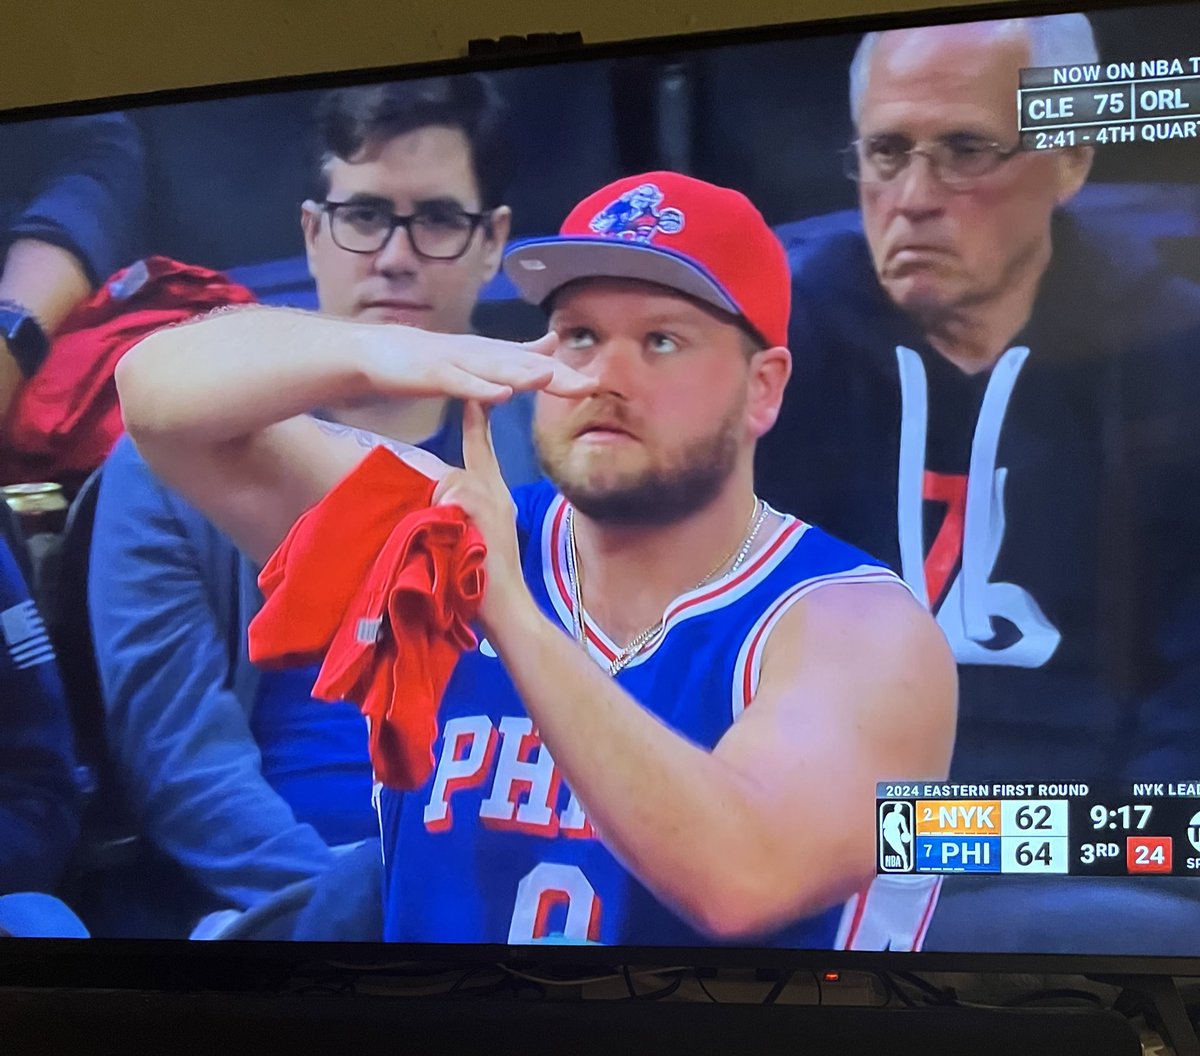 Who is the @__ChrisCote doppelgänger on the Knicks/76ers broadcast? We need @pablofindsout to find out…